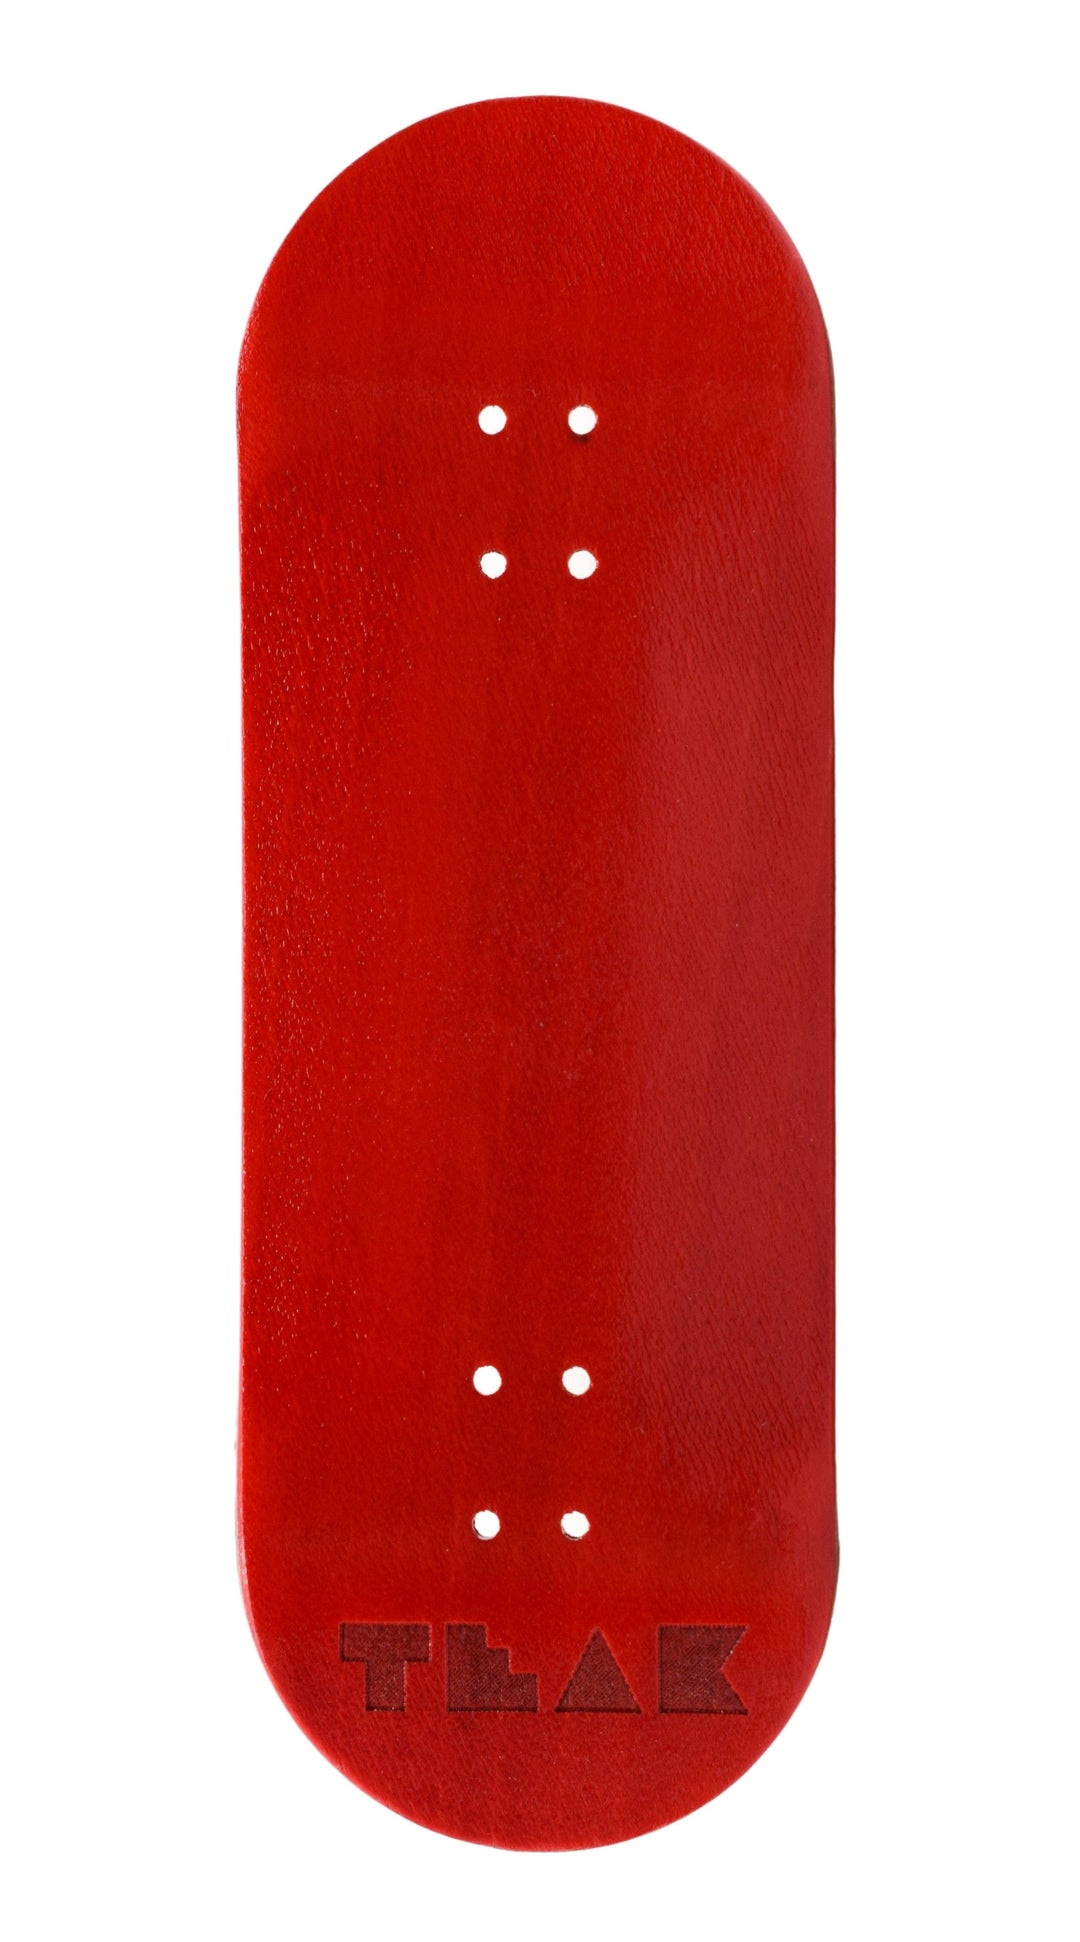 Teak Tuning PROlific Wooden 5 Ply Fingerboard Deck 32x95mm - Cherry Red - with Color Matching Mid Ply